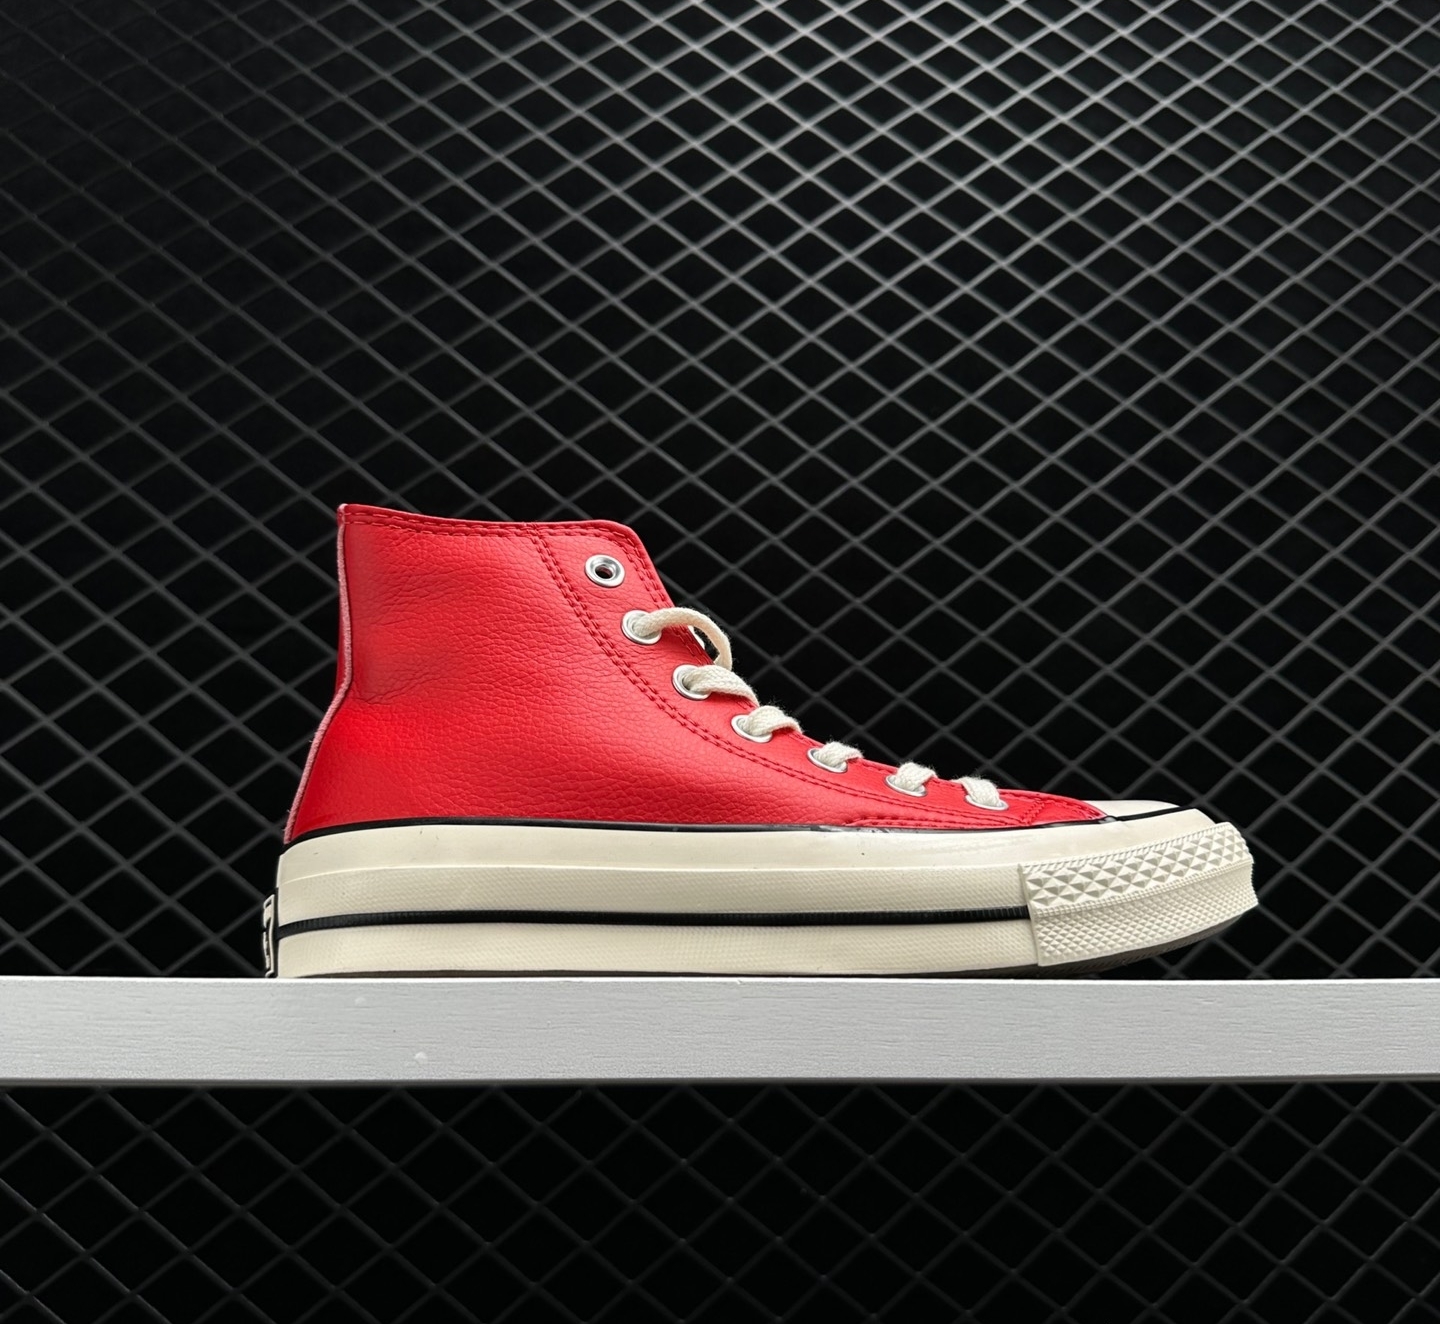 Converse Chuck 70 High 'University Red' - Classic Sneakers for Every Style